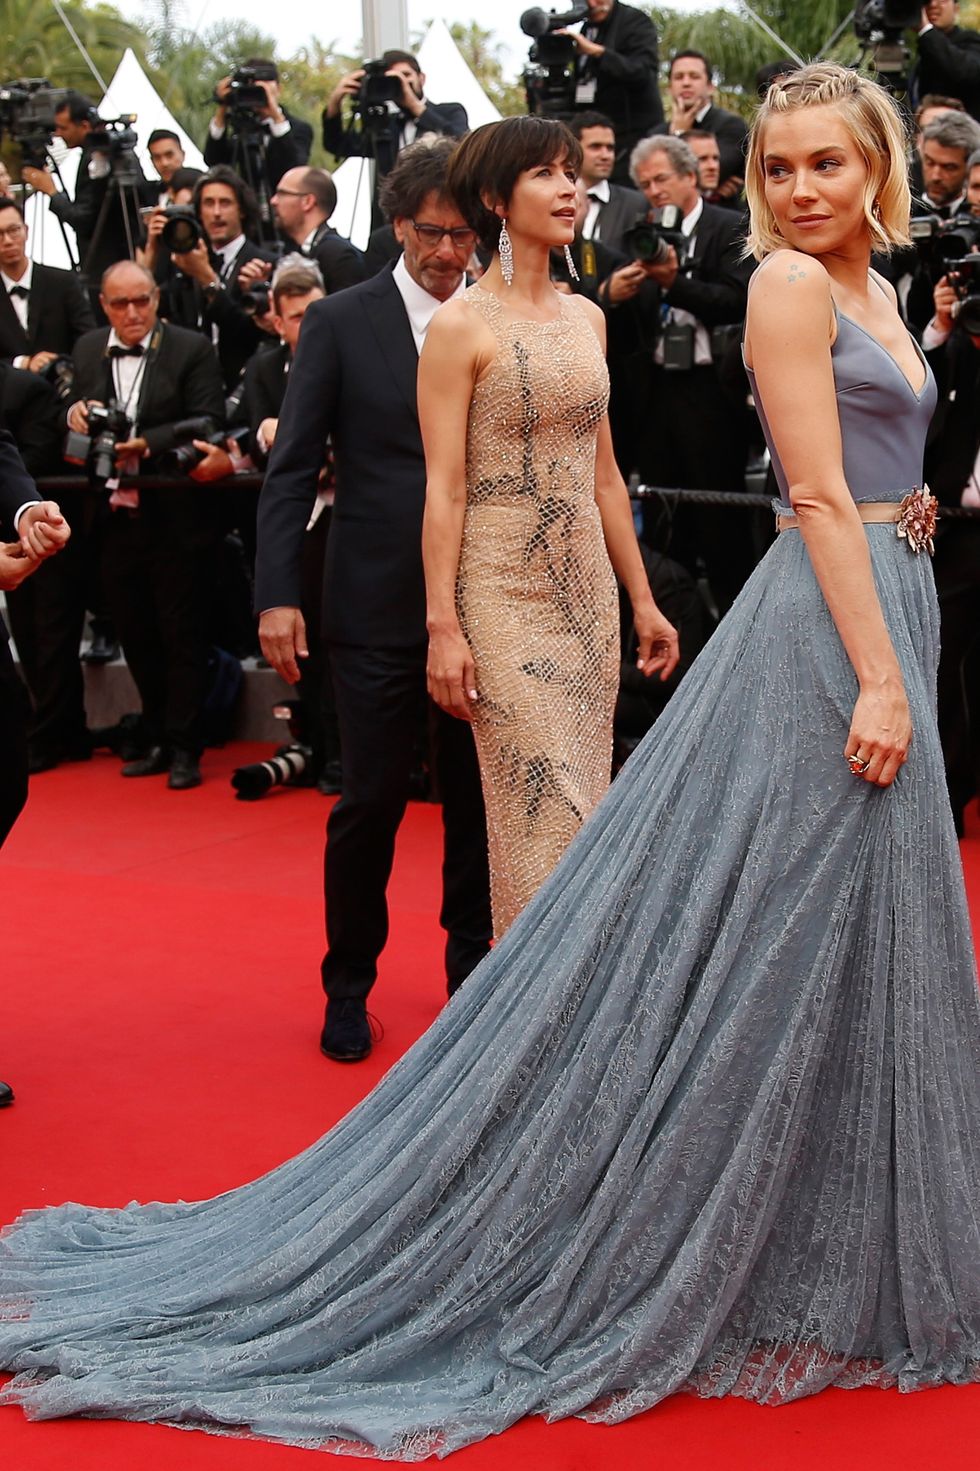 Sienna Miller at the Cannes Film Festival